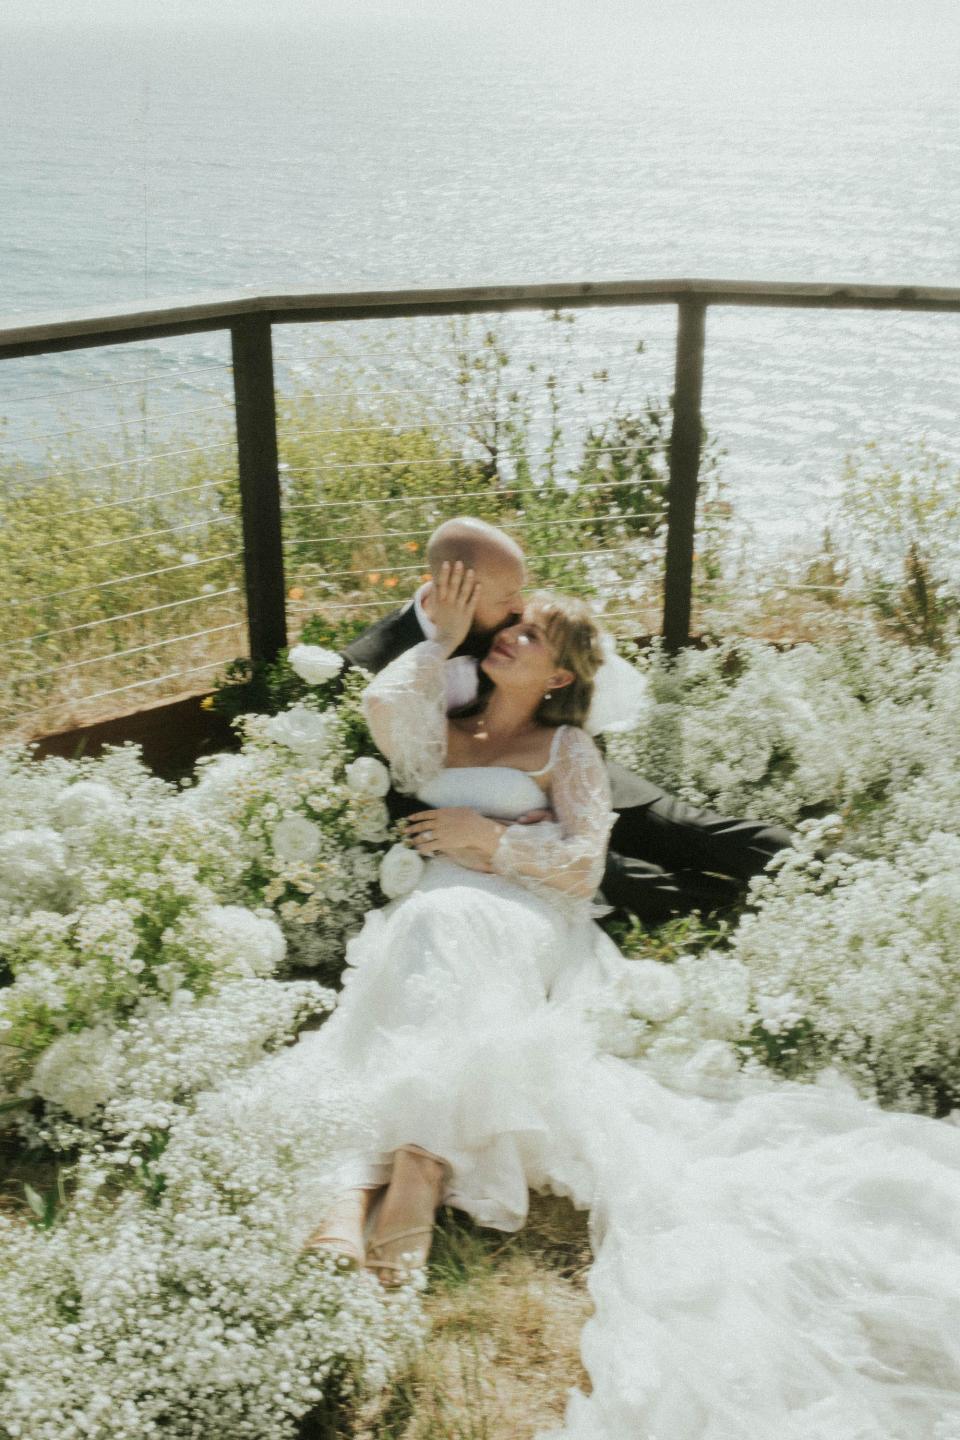 A bride and groom embrace and look at each other while sitting in a field of flowers.